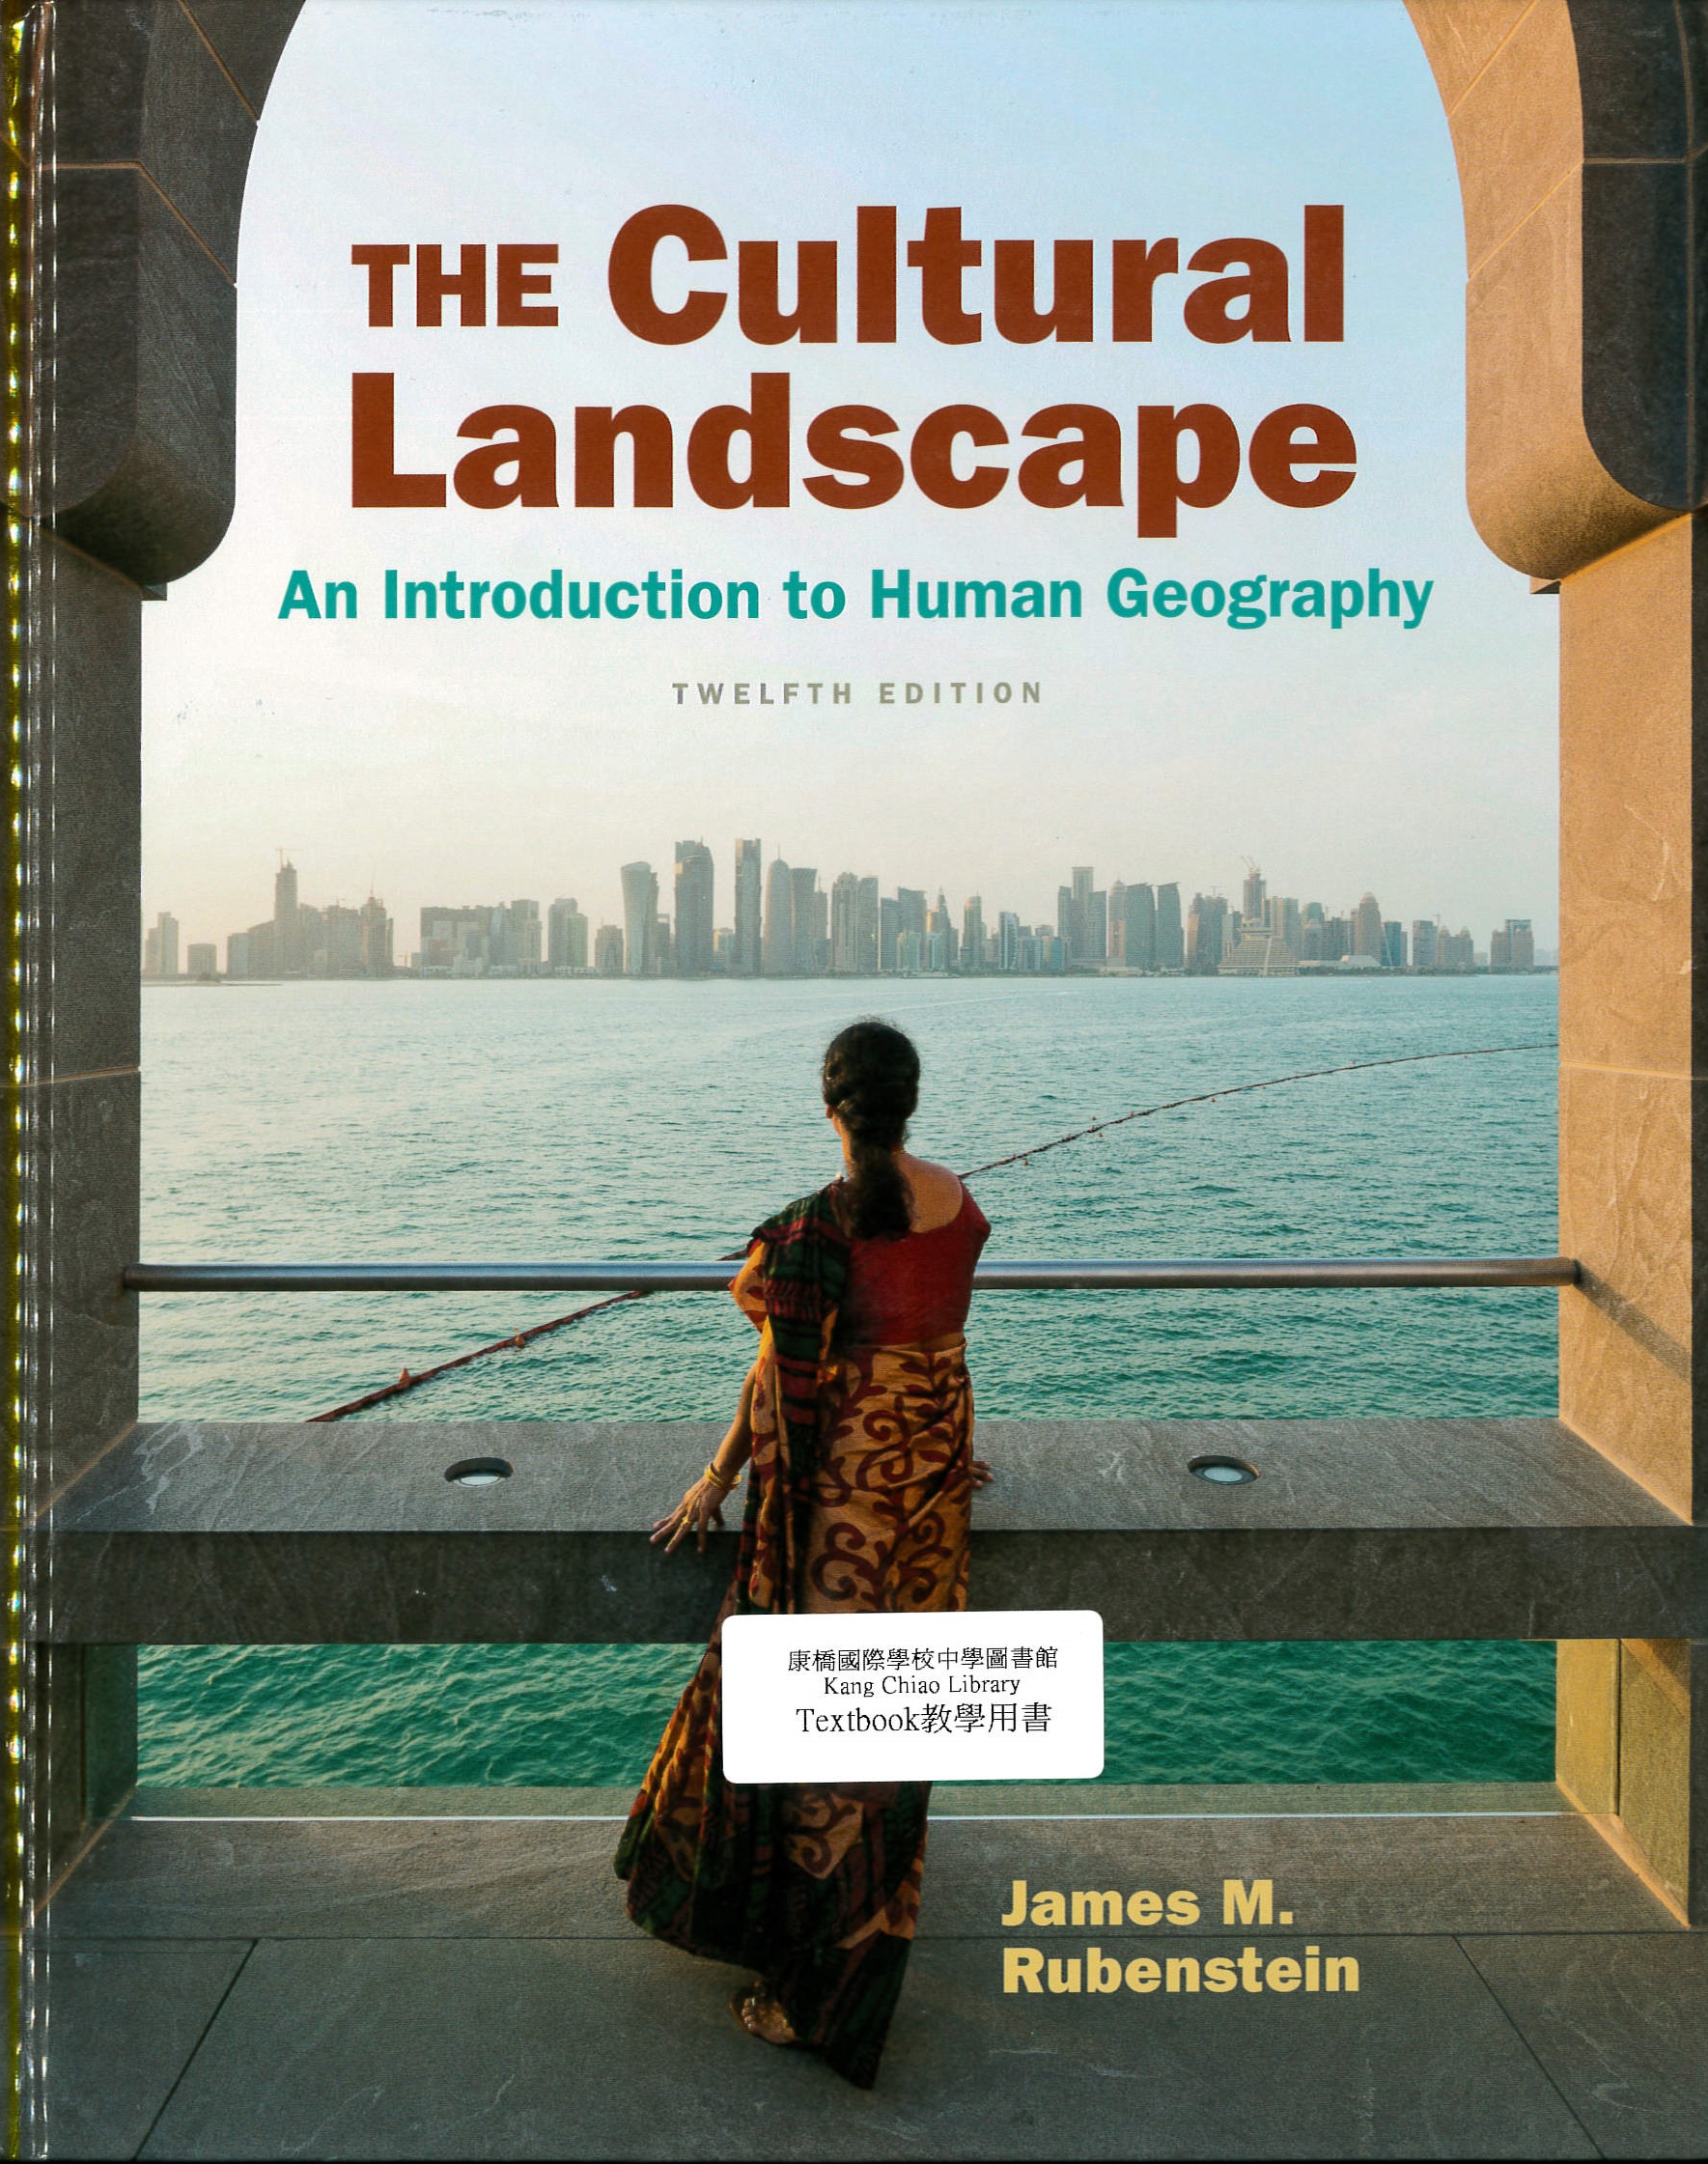 The cultural landscape [Student Edition] : an introduction to human geography